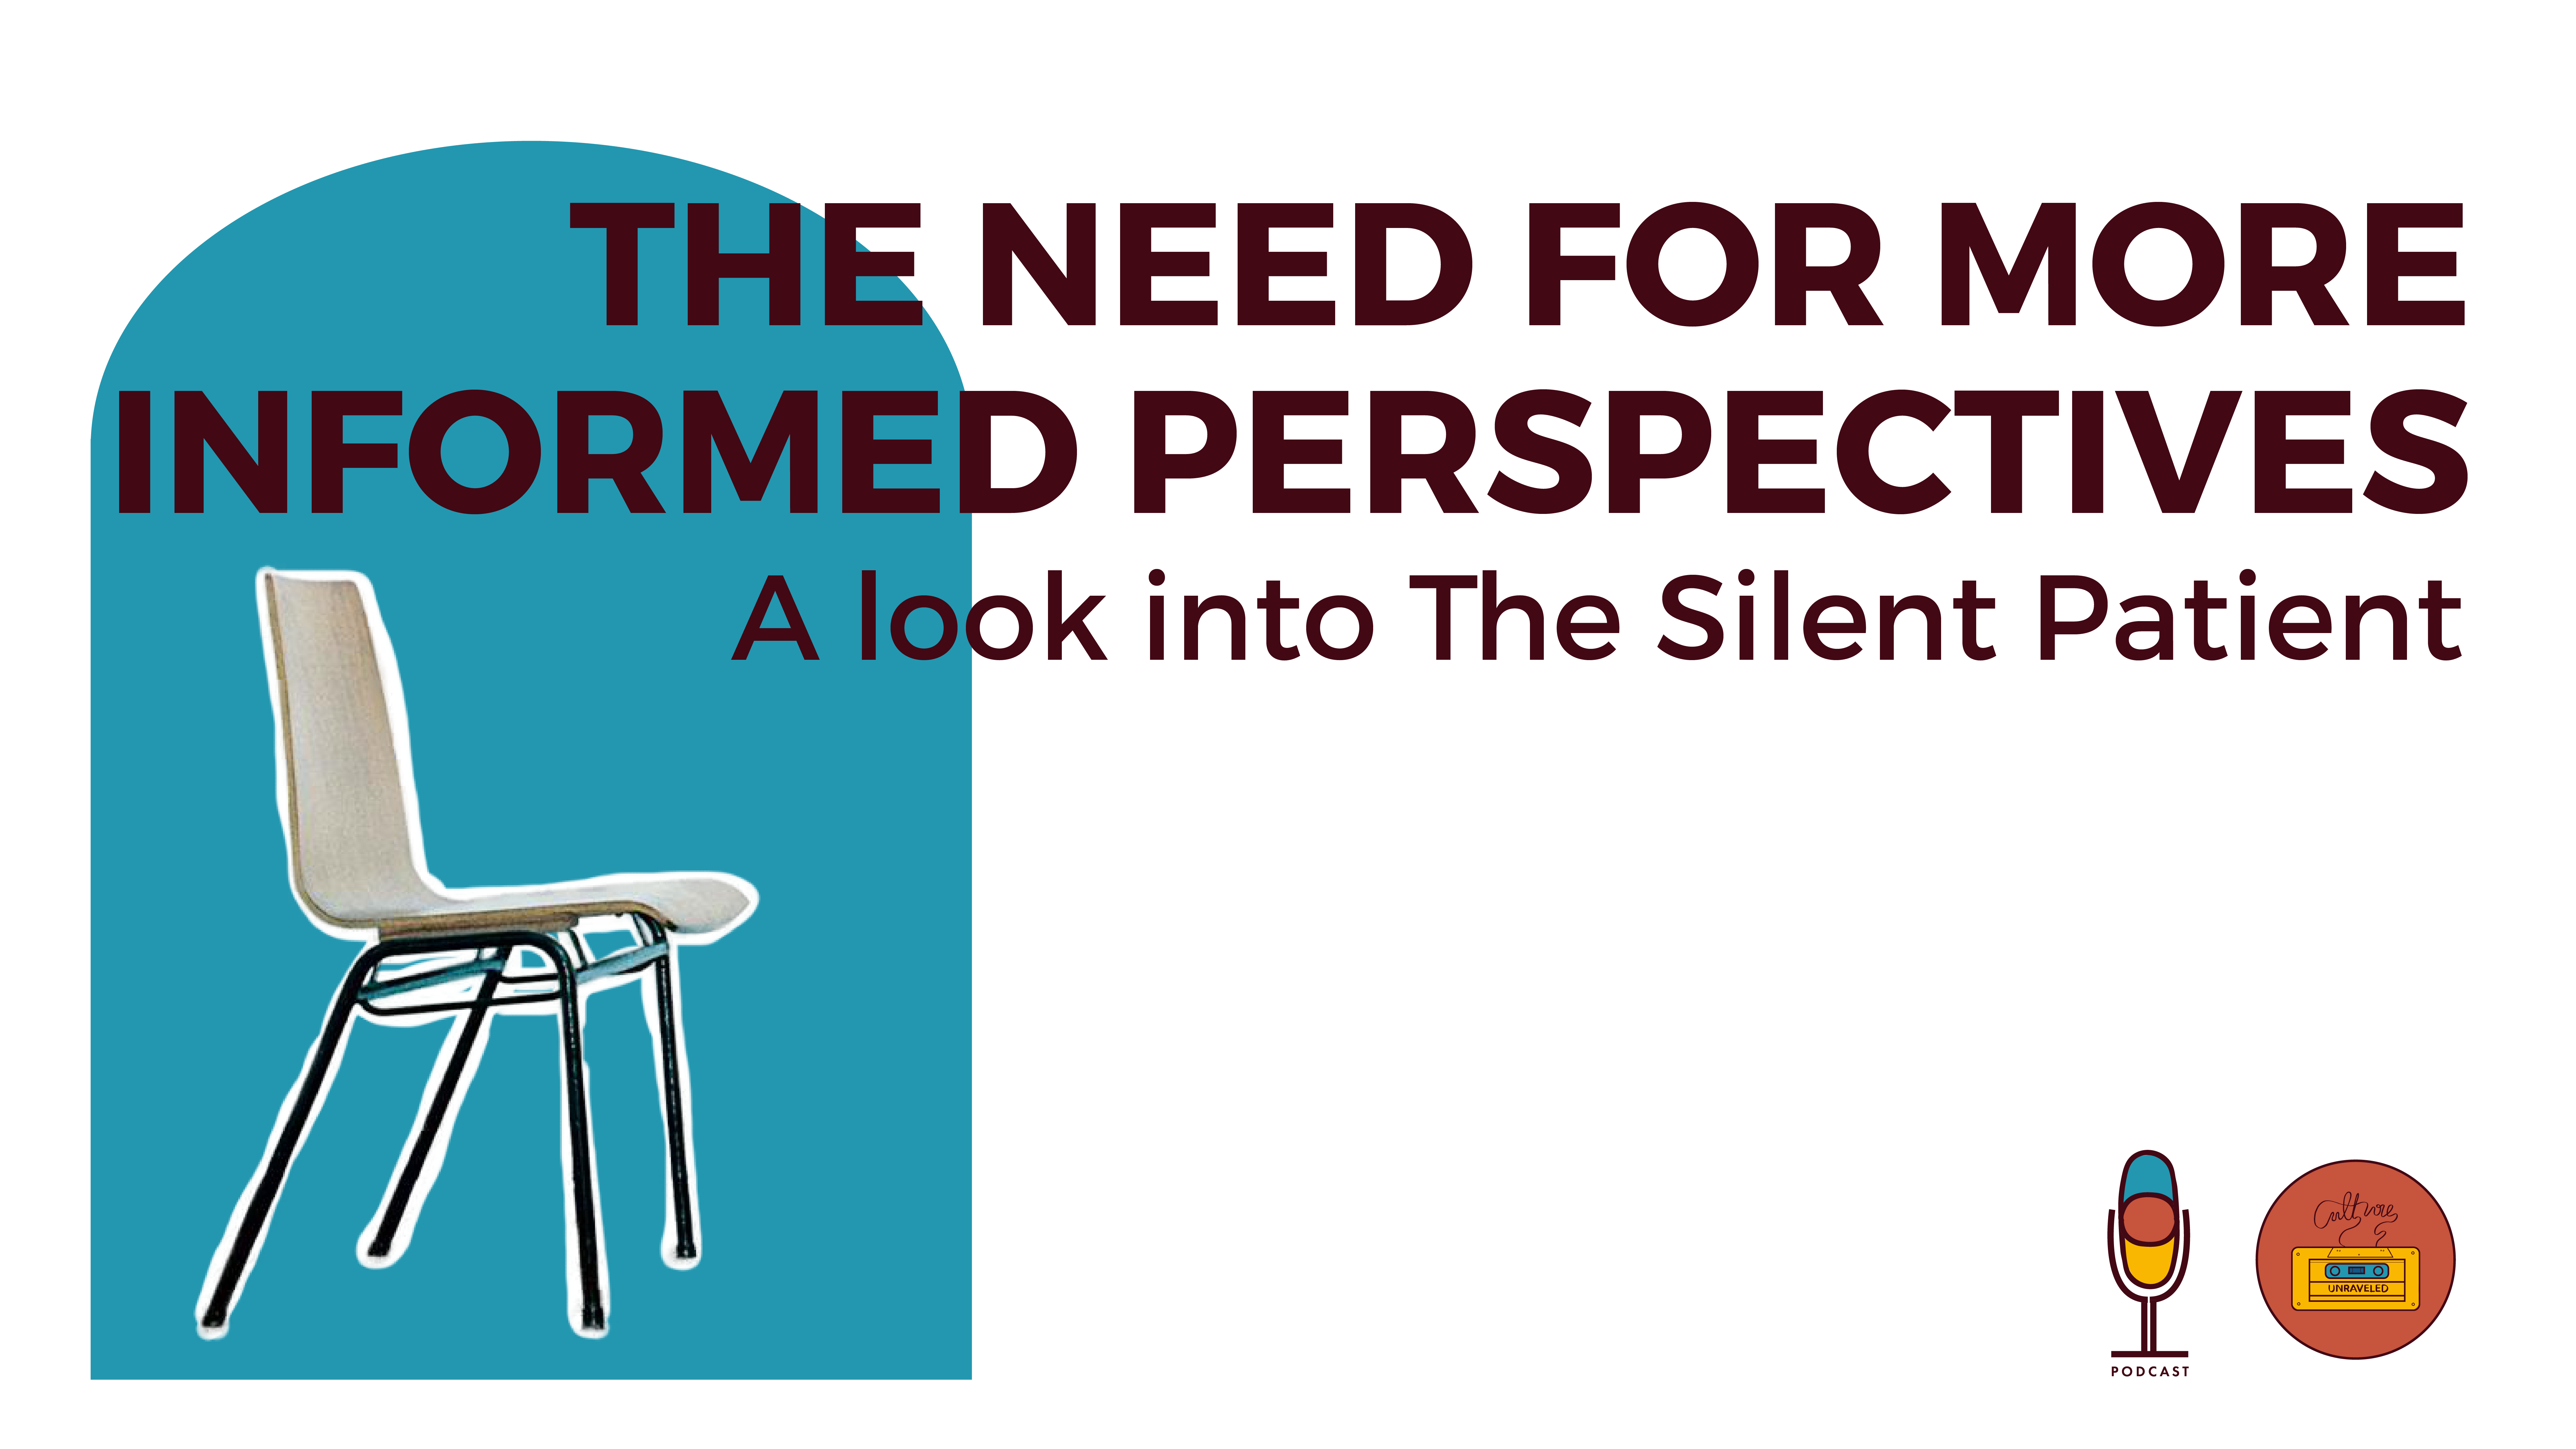 The Need for more Informed Perspectives. A Look into The Silent Patient